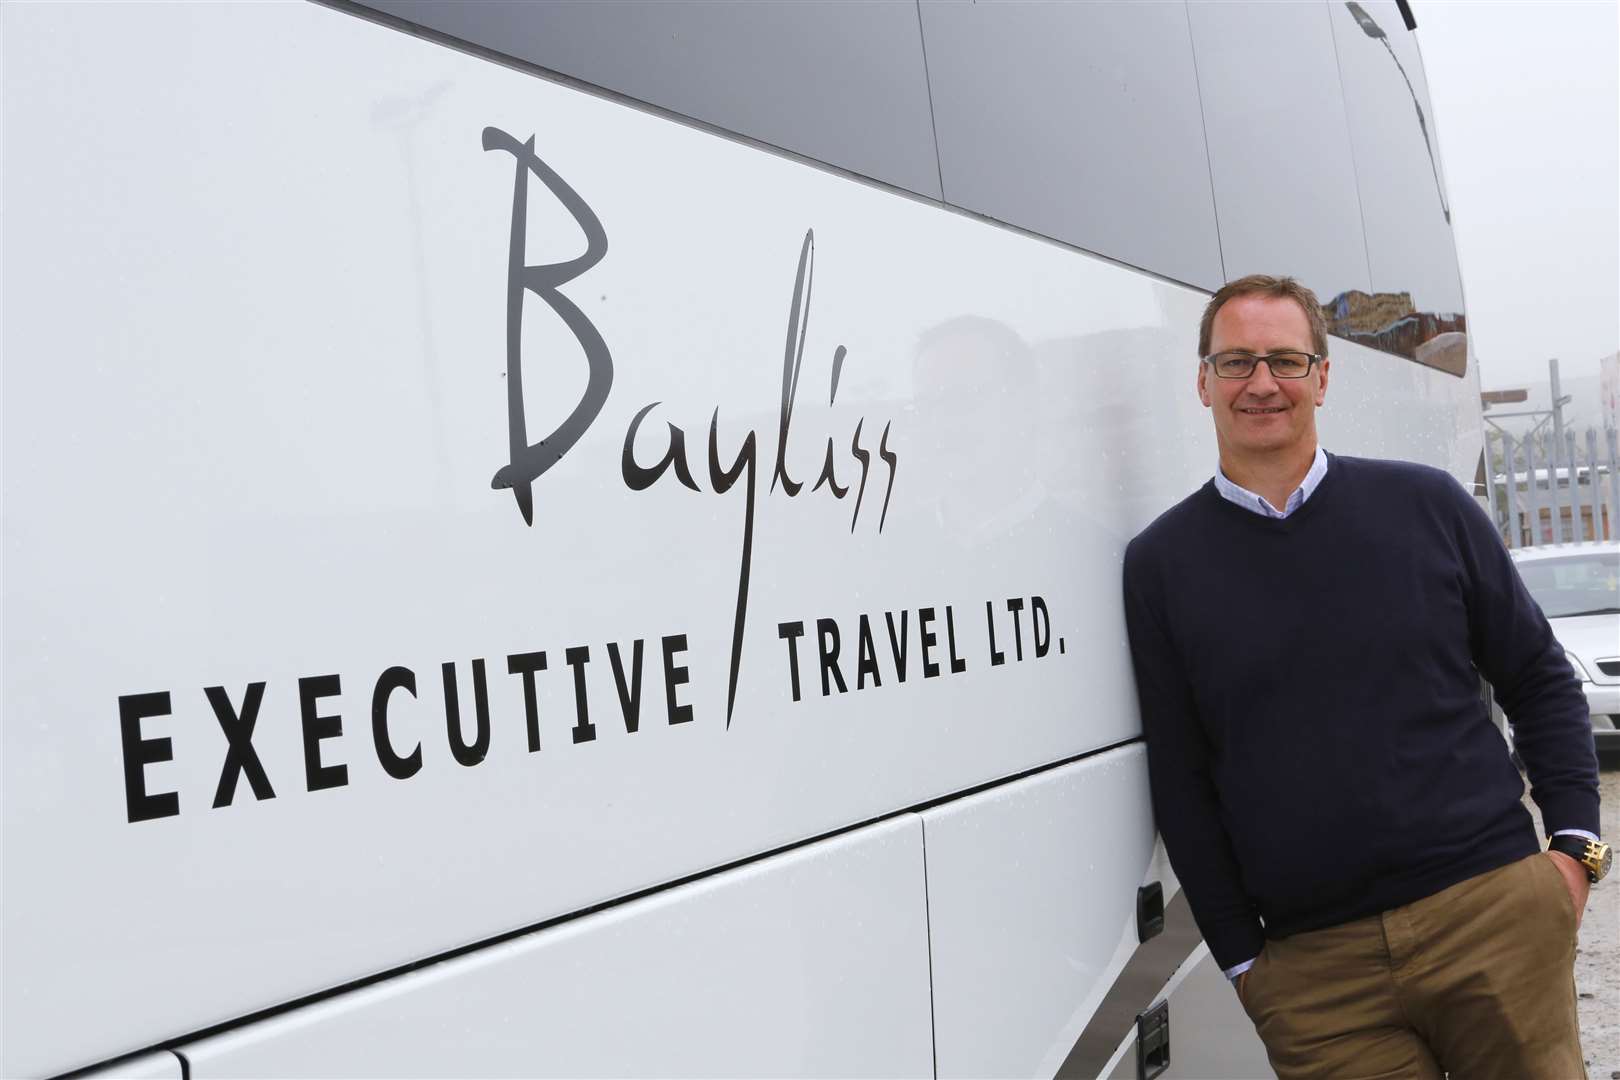 Alistair Bayliss from Bayliss Executive Travel whose coaches will be running the service Picture: Andy Jones